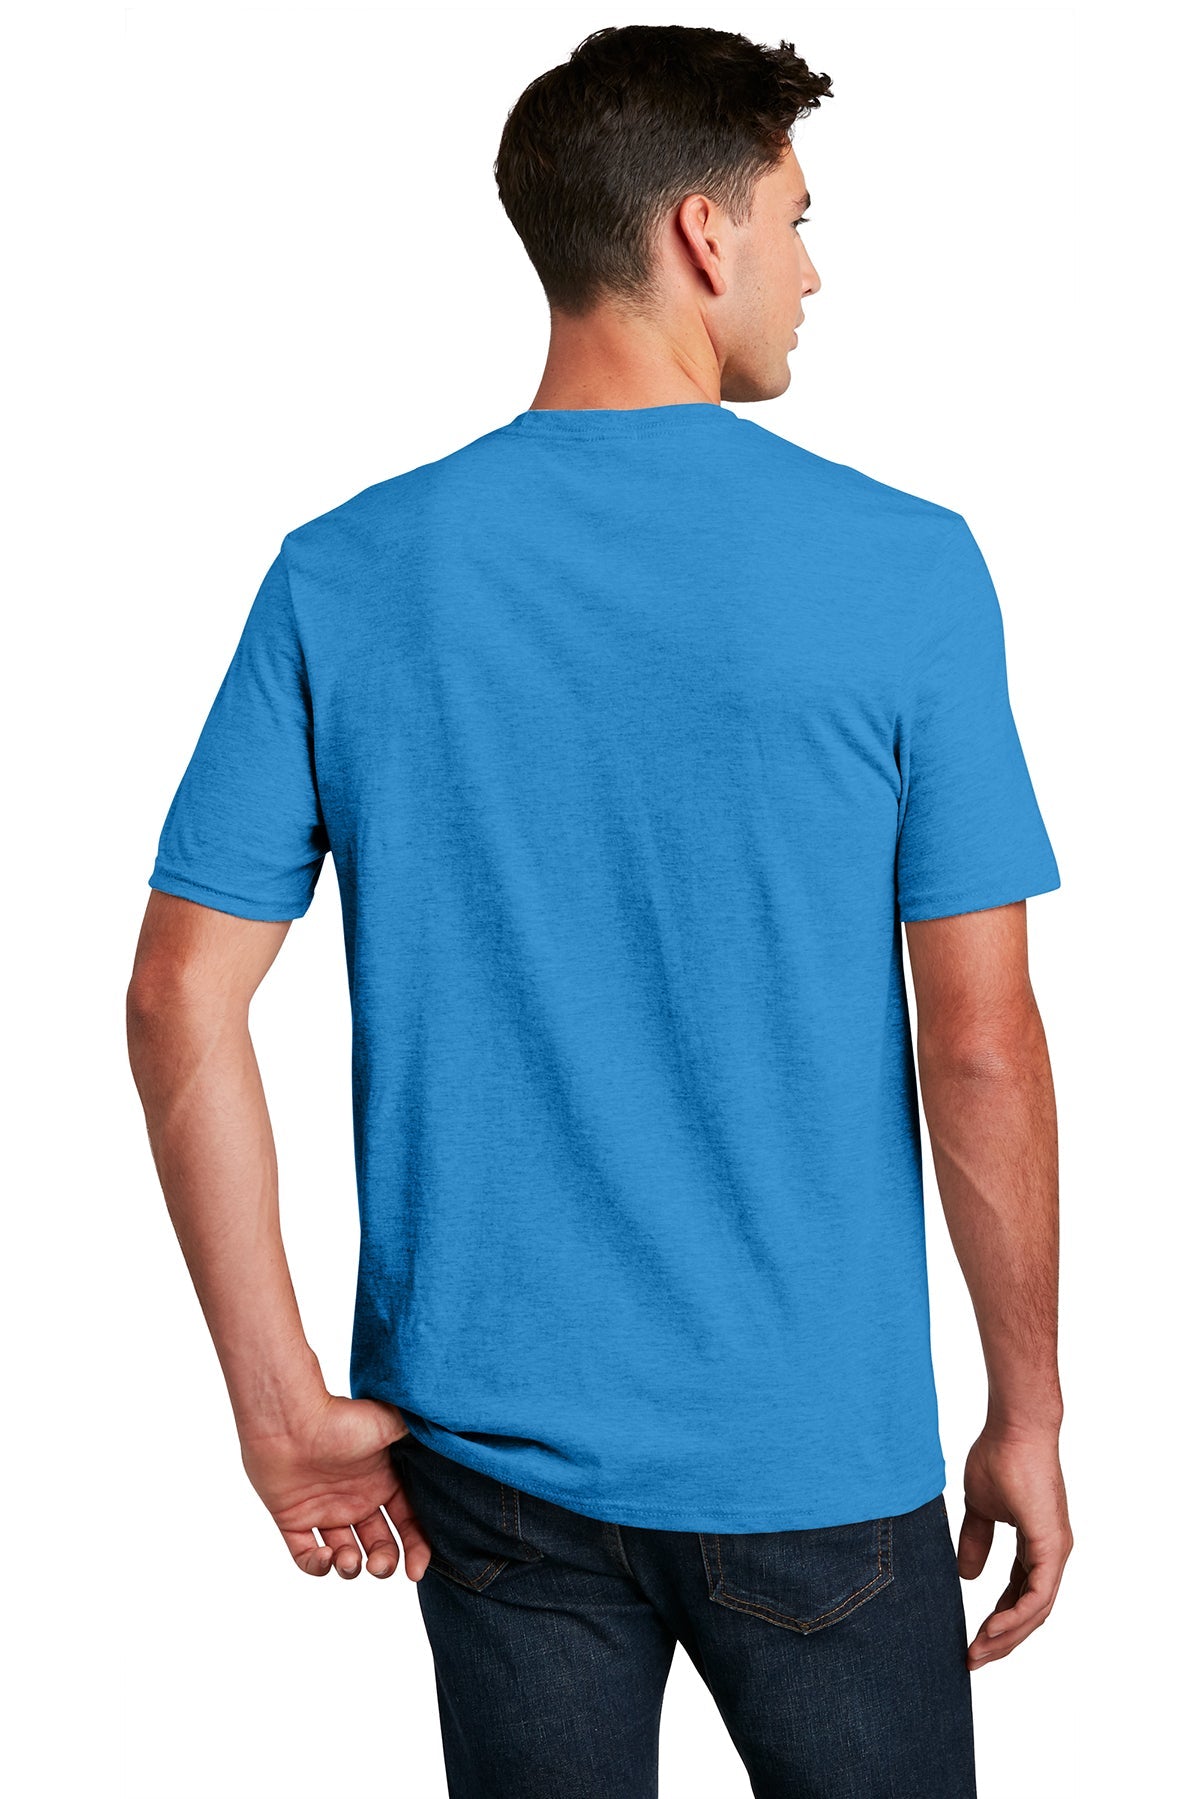 District Made Mens Perfect Blend Tee's, Heathered Bright Turquoise